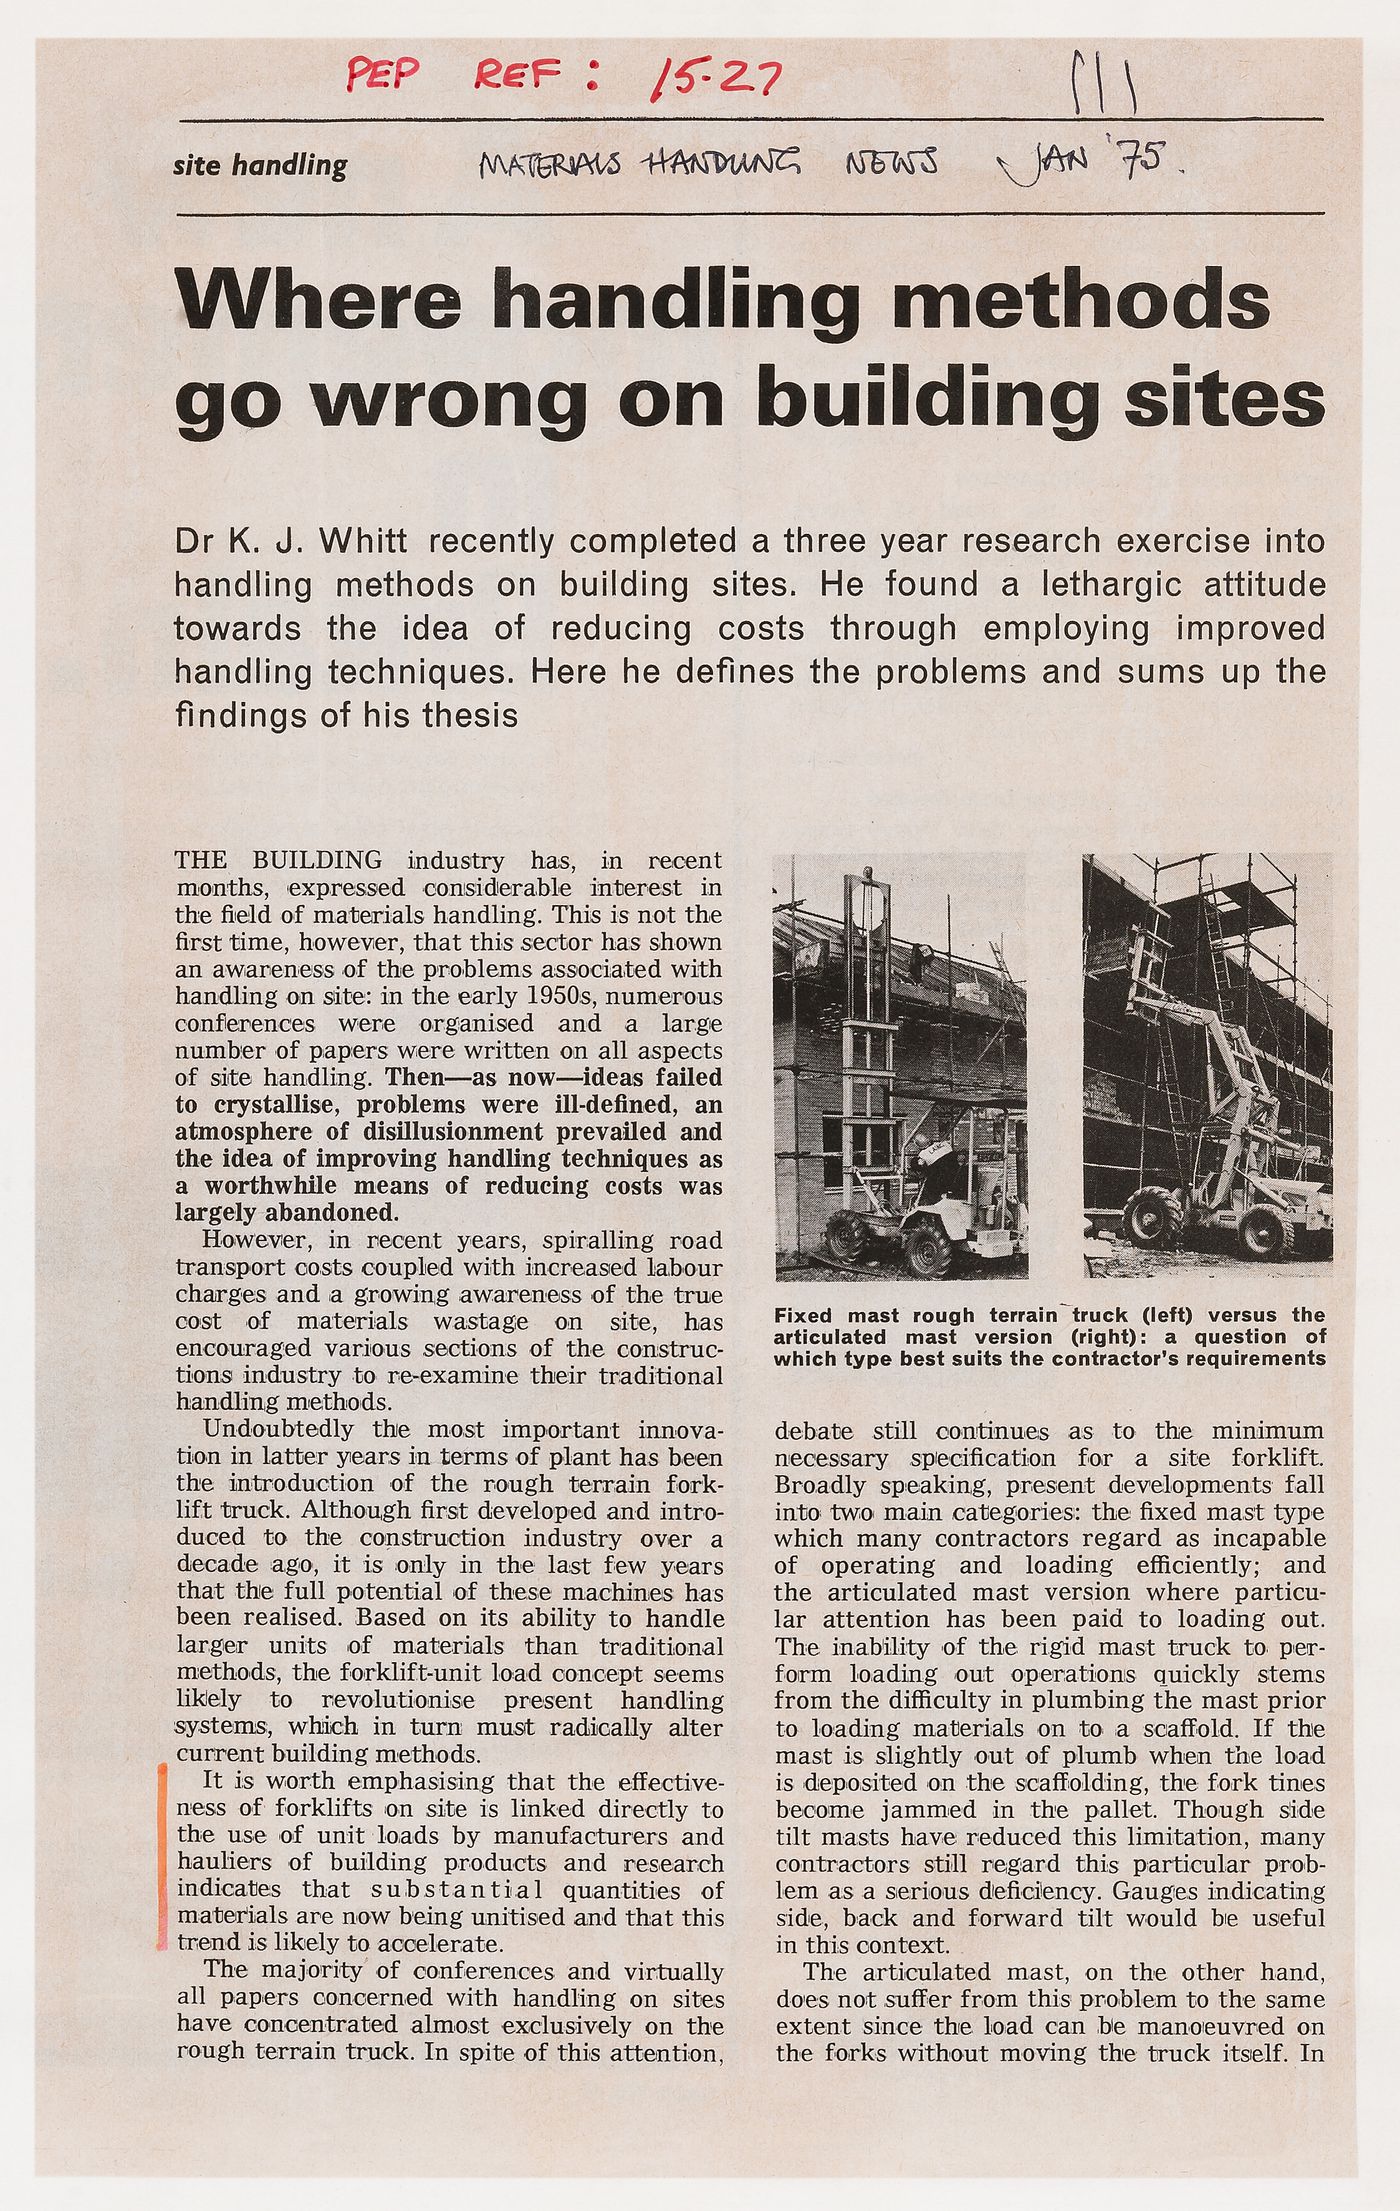 Where handling methods go wrong on building sites